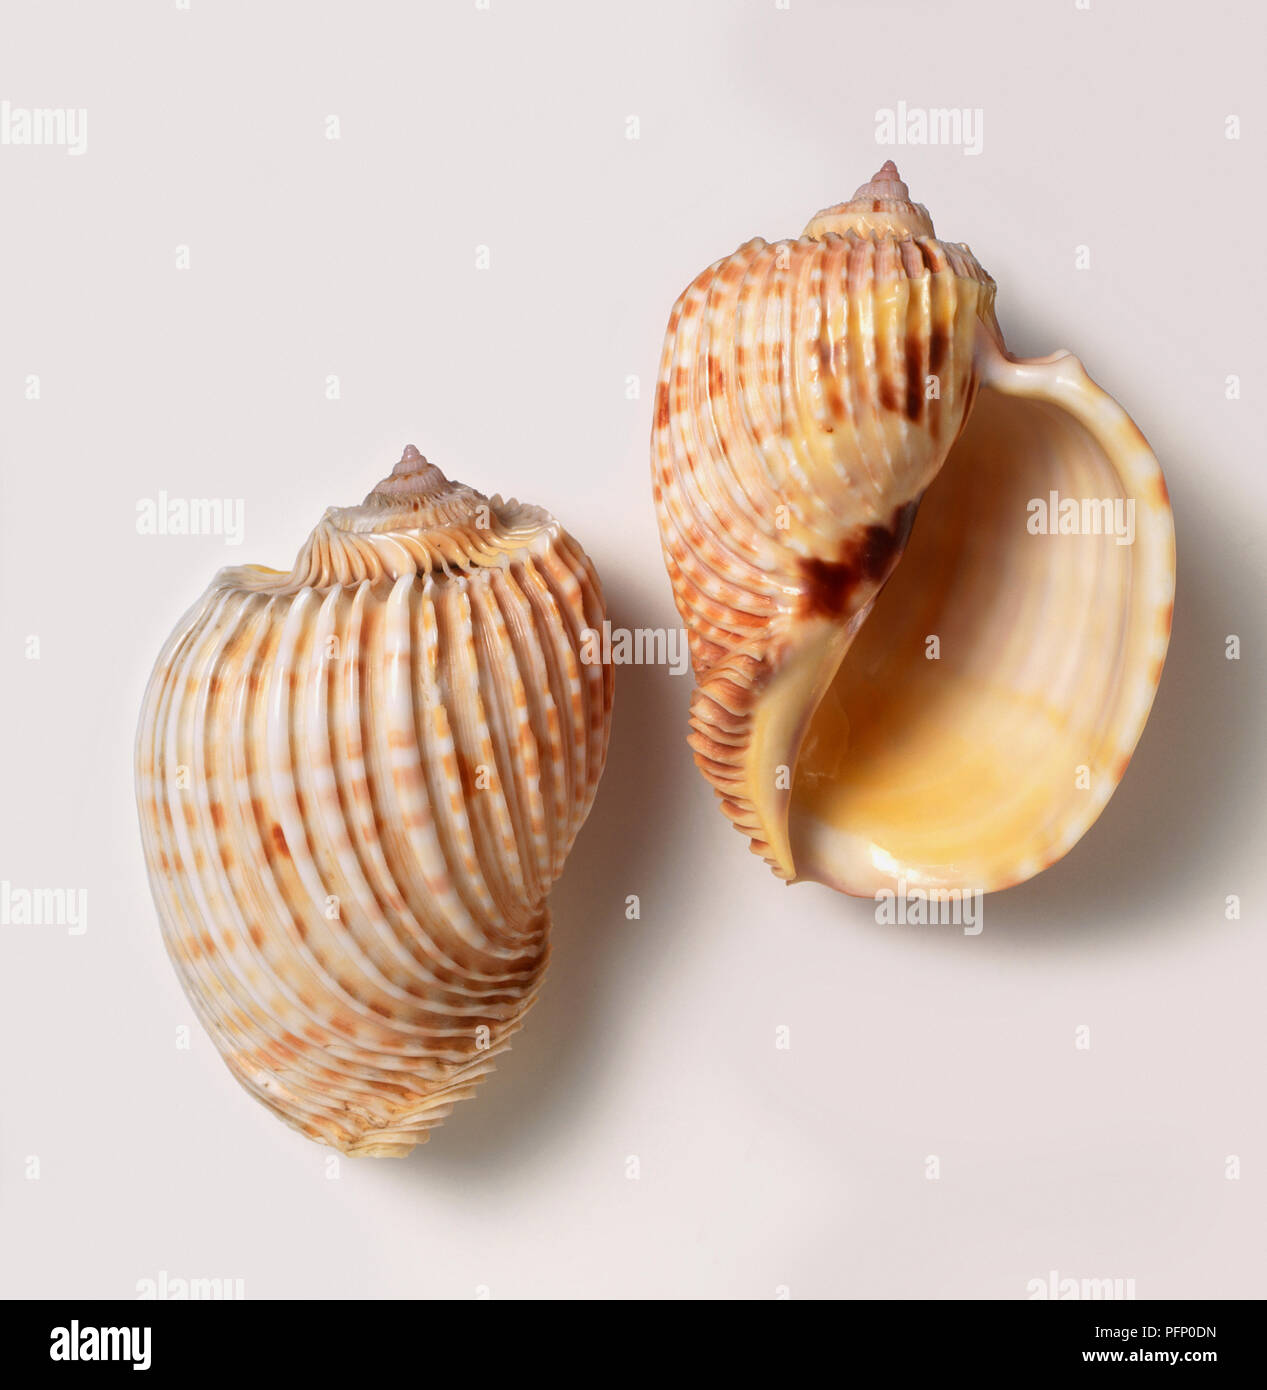 Top and underside view of Imperial harp shell (Harpa costata) Stock Photo